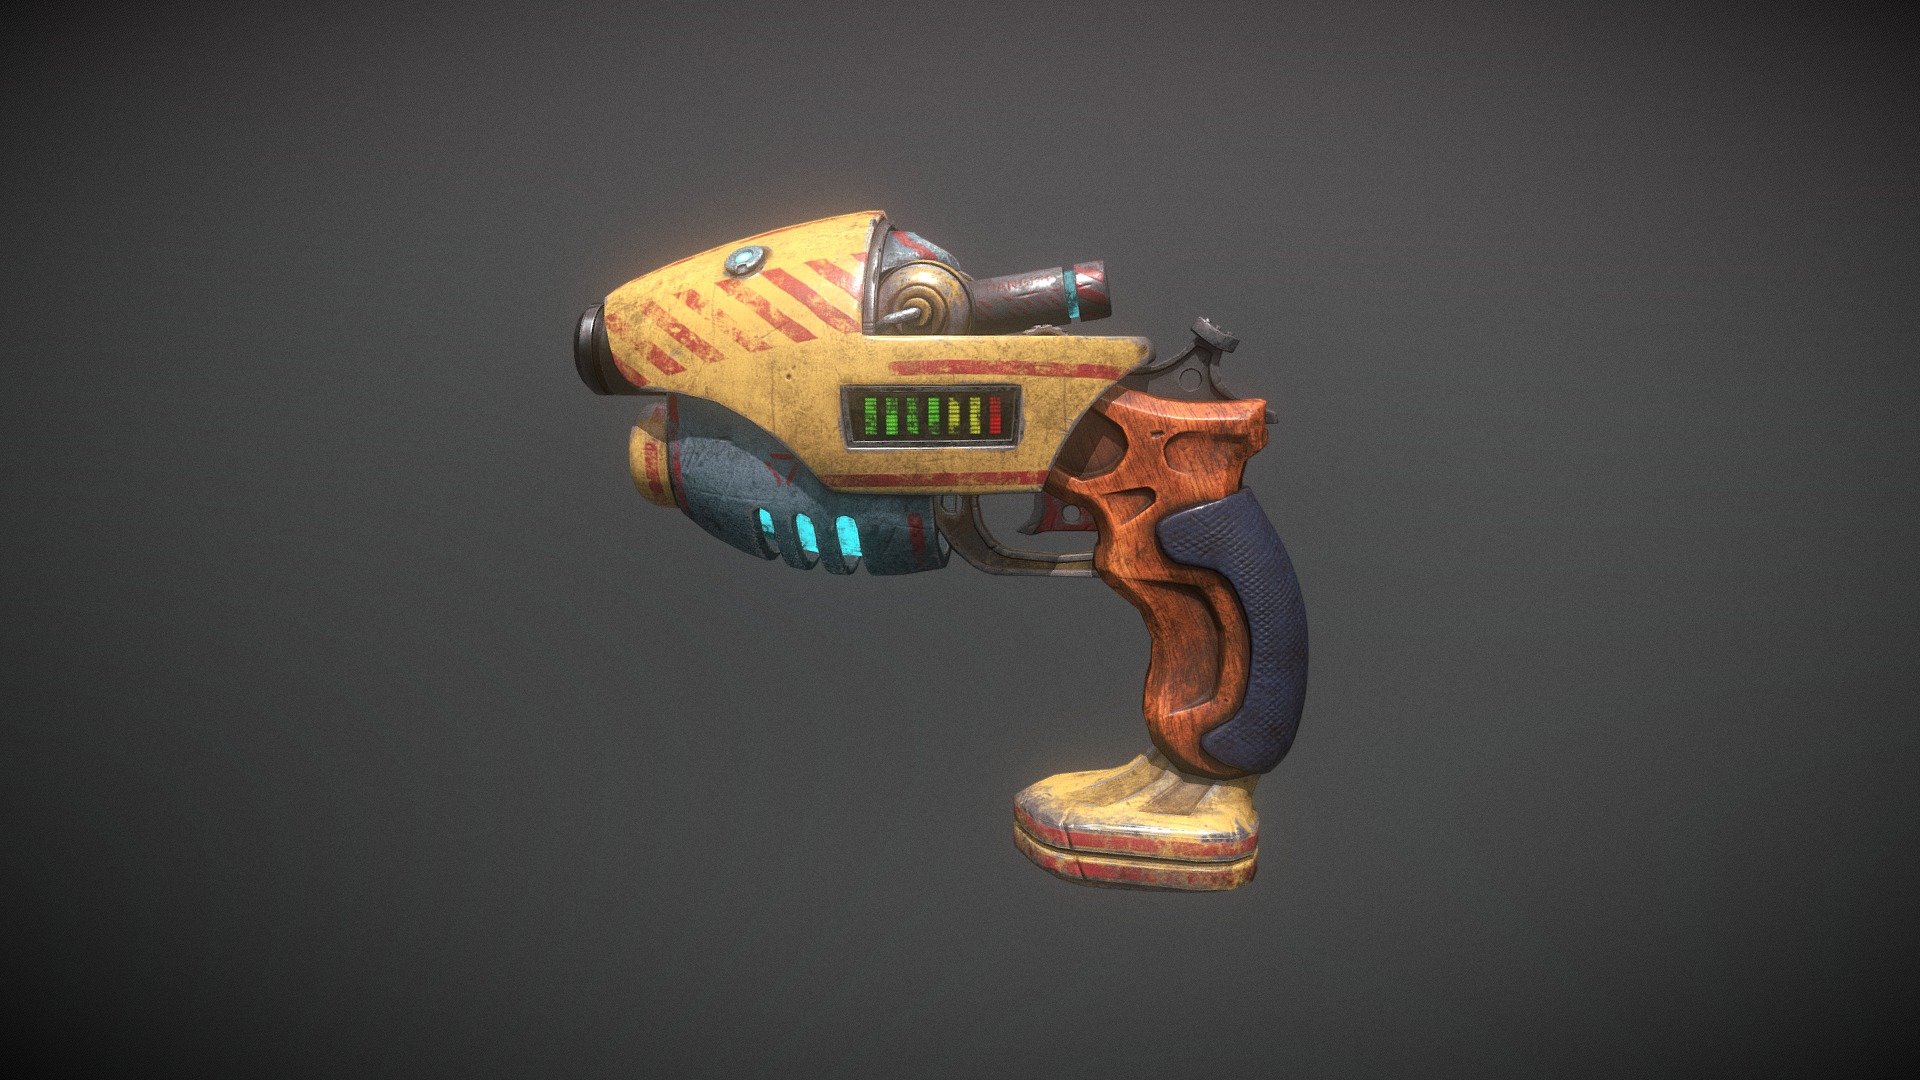 A gun designed, modeled and textured by me for my studendts in the 3D Art Master at EVAD Málaga.
It´s very enjoyble to go through all the process, starting in photoshop and take it into blender, zbrush, substance painter, and now here in SF.
Hope you like it!! - Steampunk sci-fi gun - 3D model by Rafael Comino Matas (@Rafael.Comino.Matas) 3d model